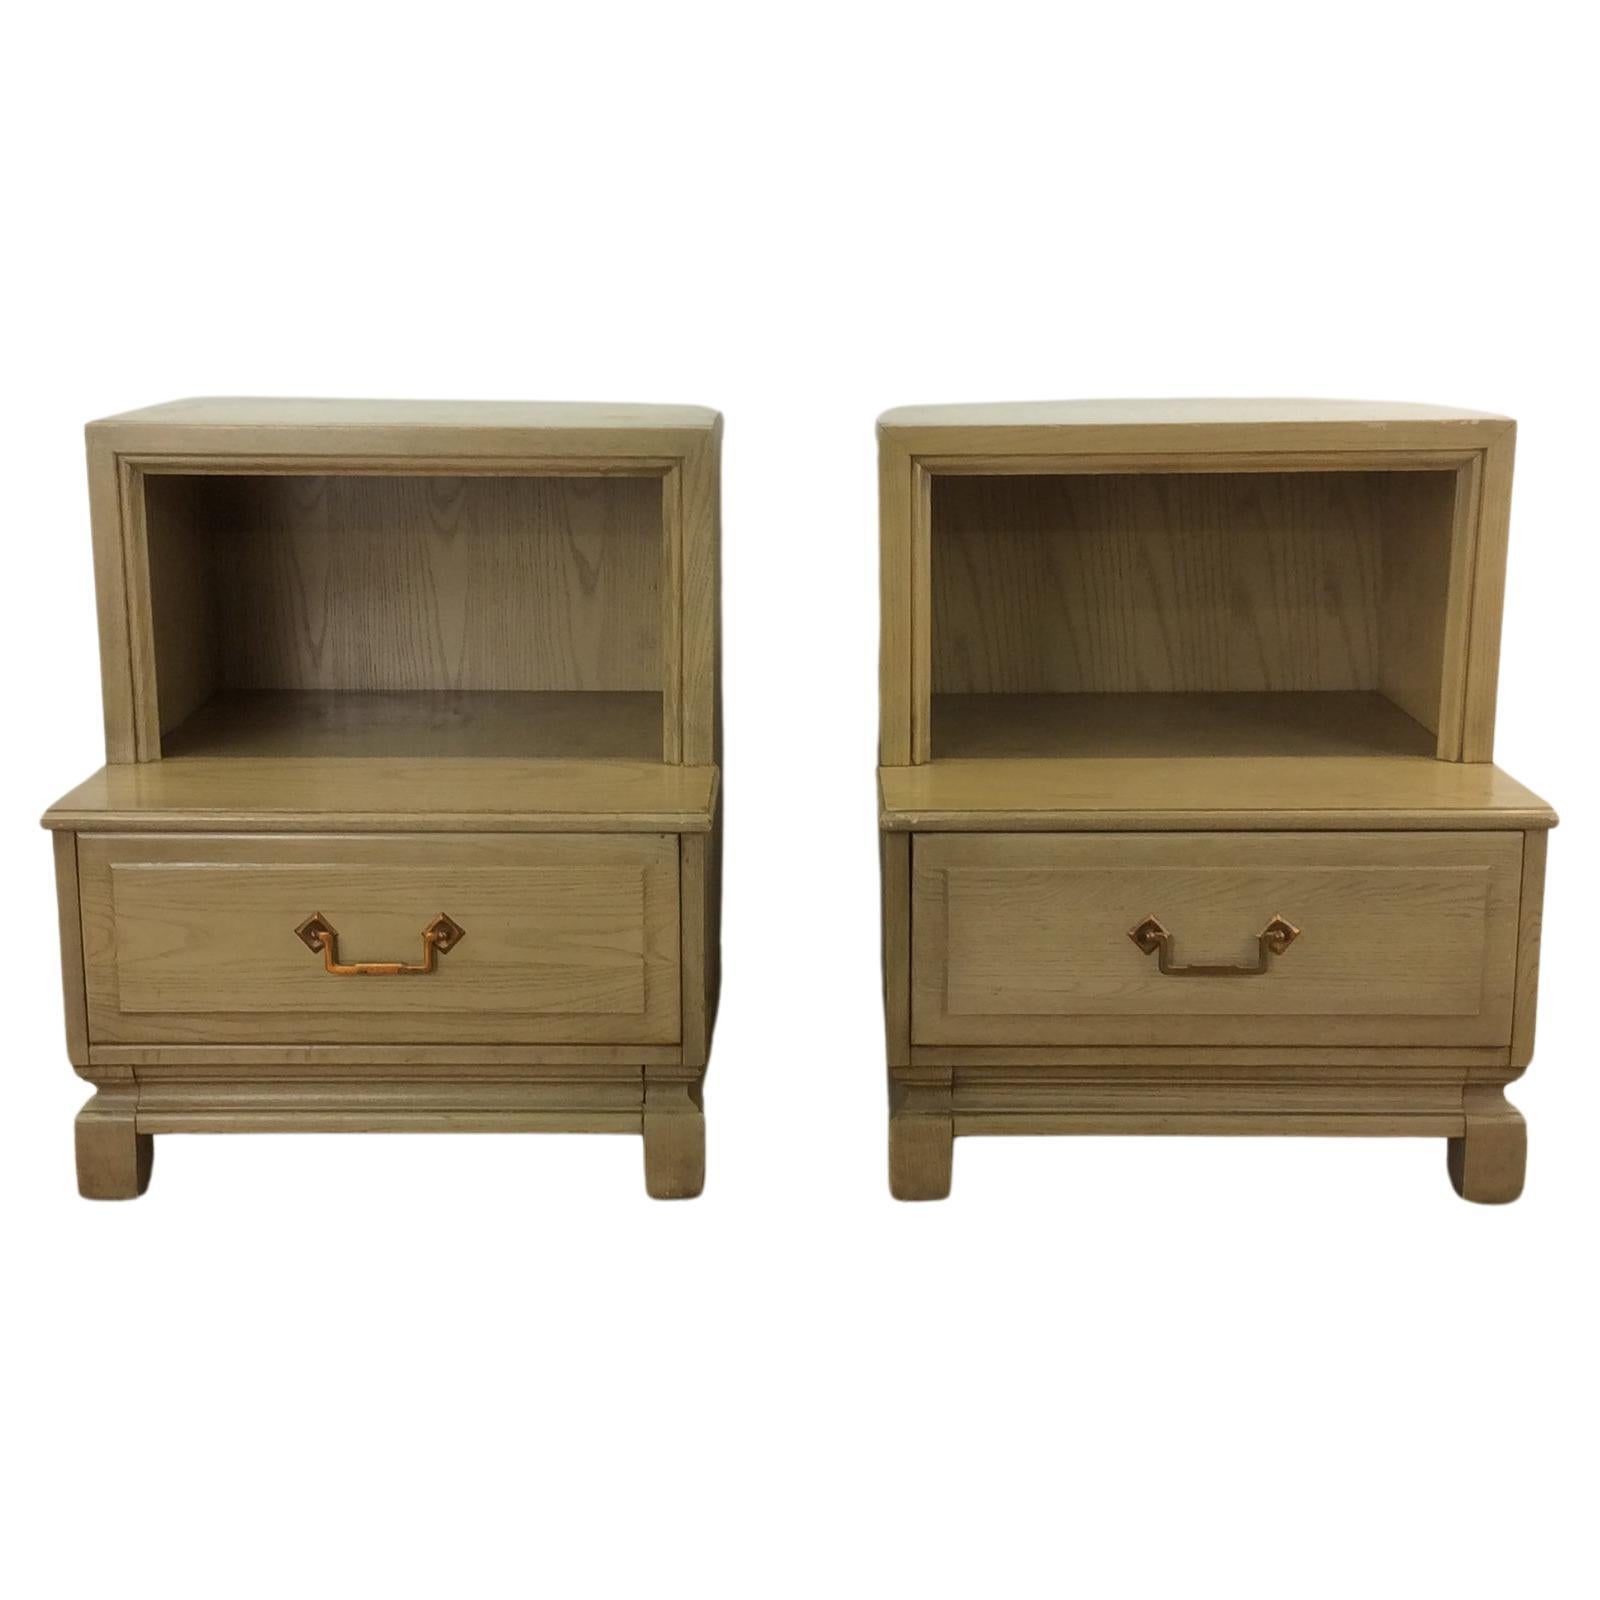 Mid Century Modern Pair of Nightstands with Limed Oak Finish